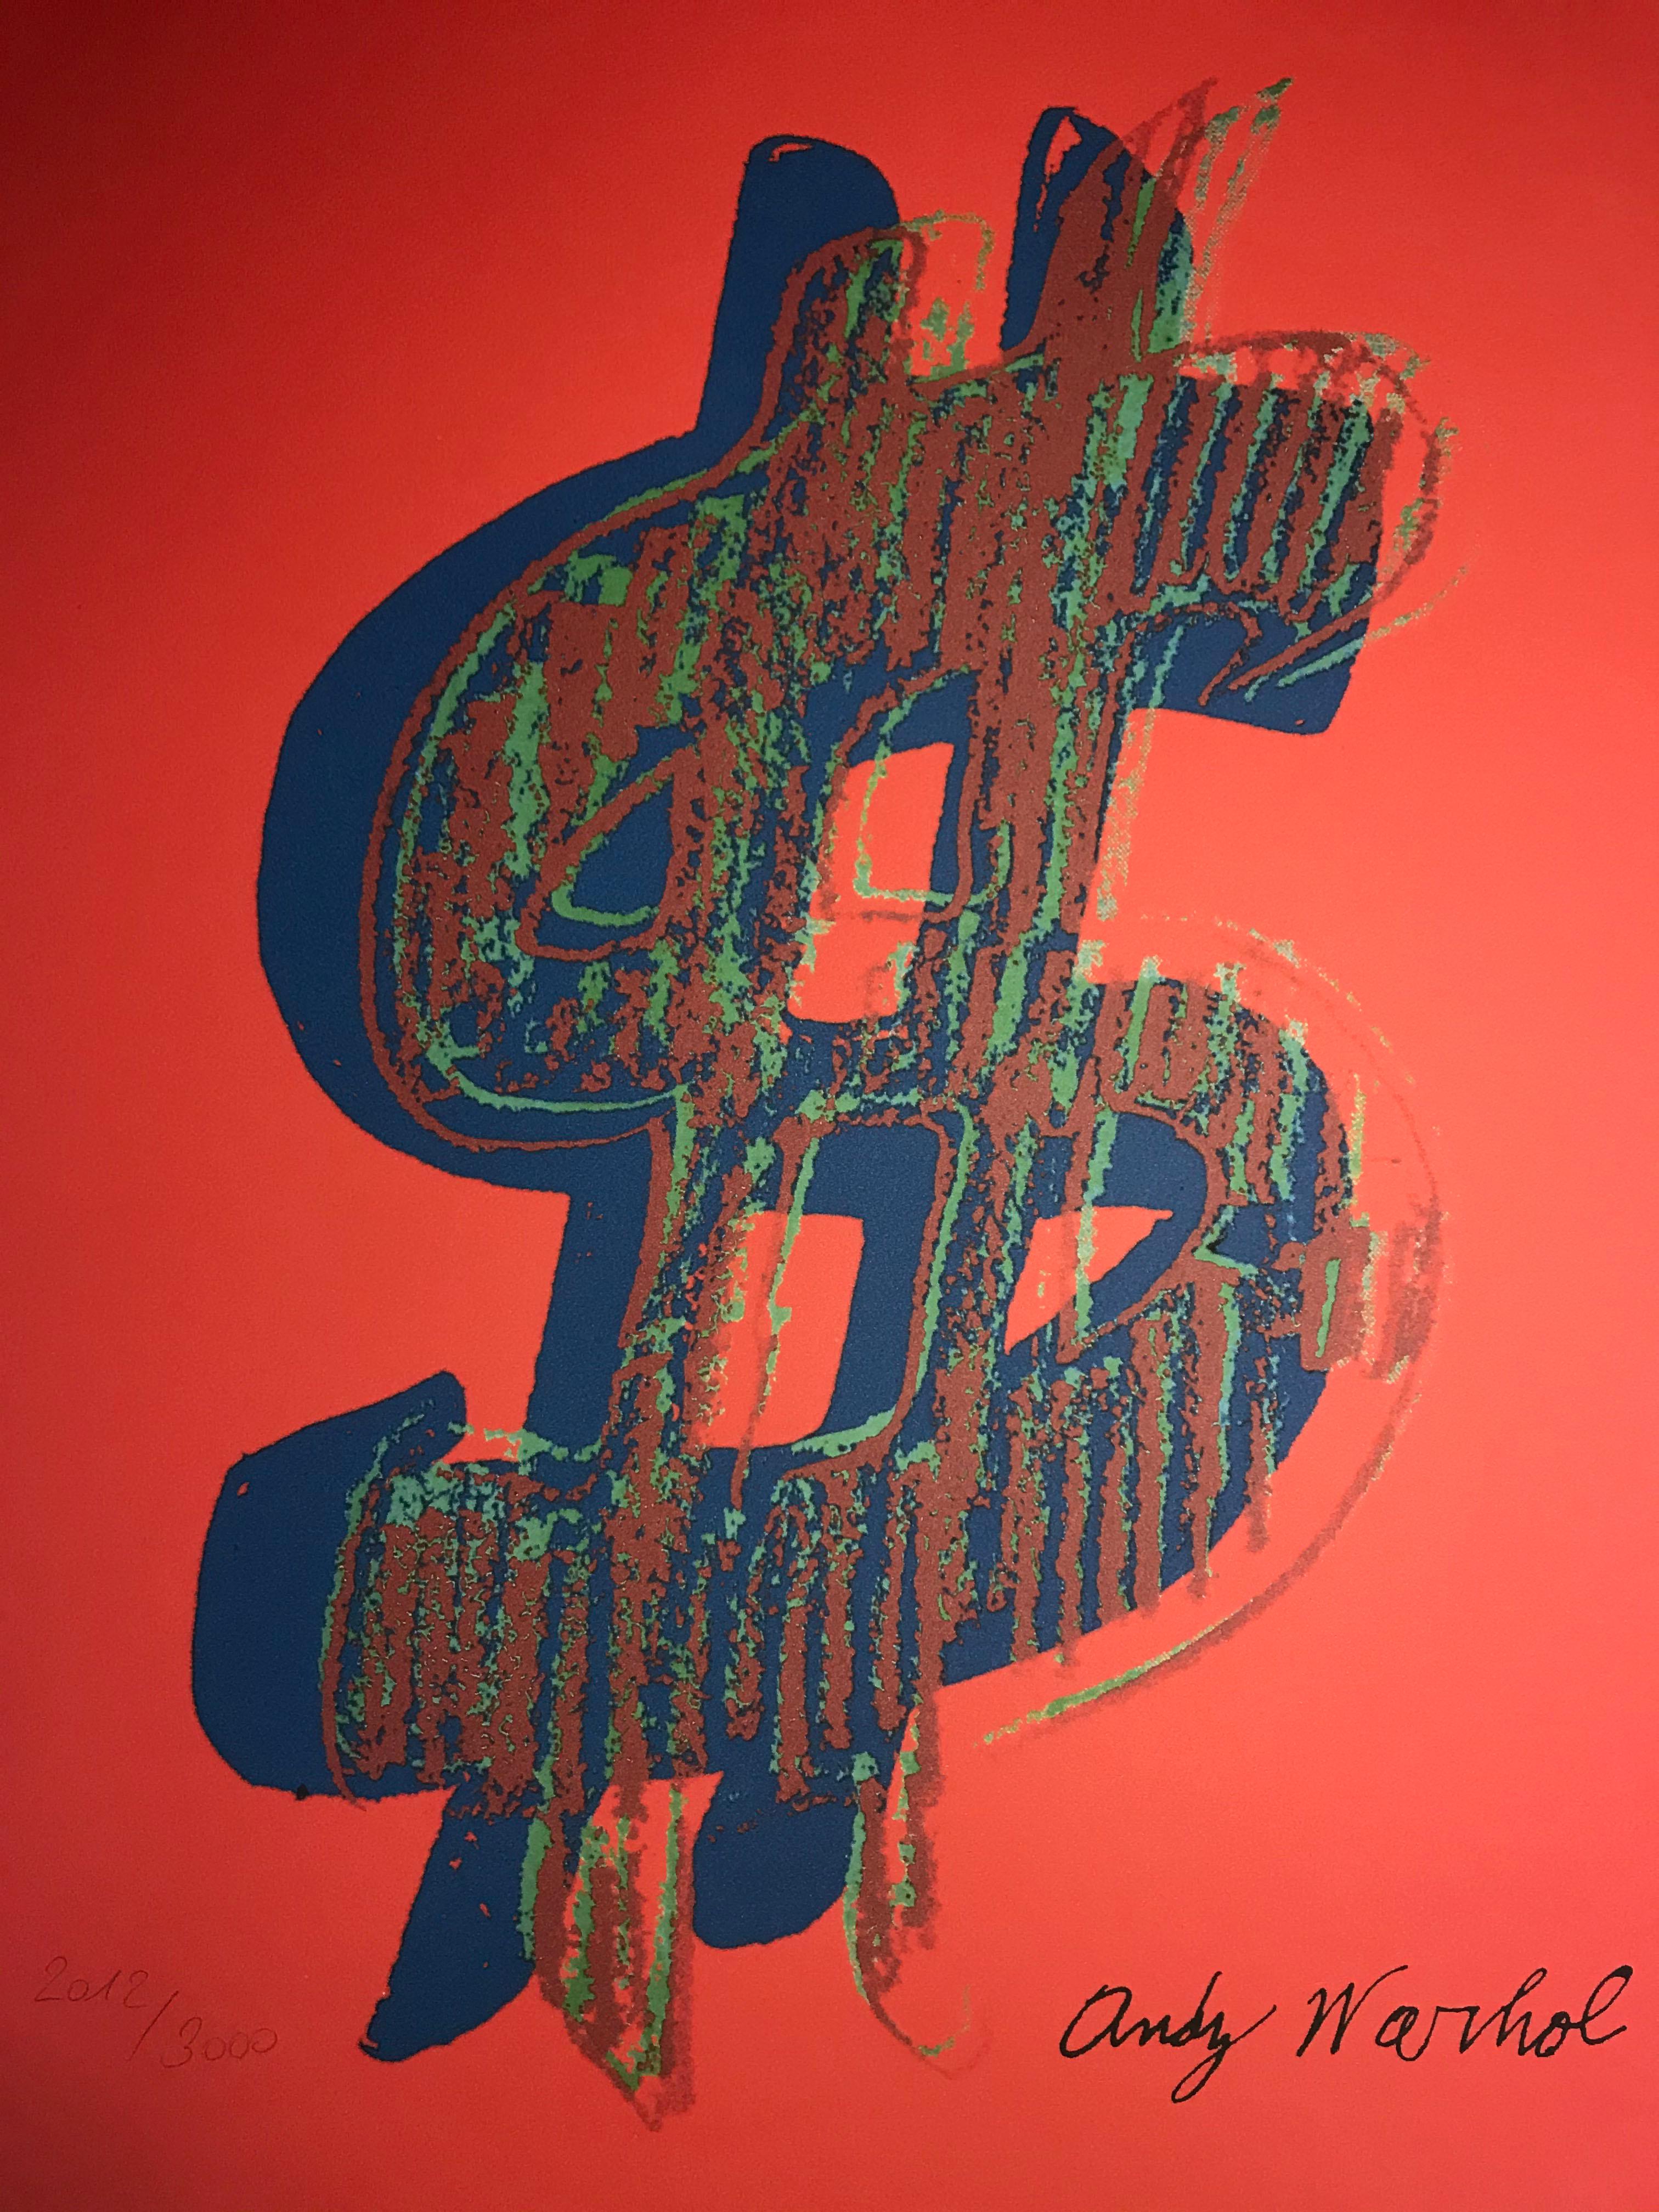 Granolithography
Dollar sign in red
Andy warhol
Signature in the board
Edition numbered in pencil at 3000 copies
1986
Cachet de cmoa au dos (carnegie museums of arts . Pittsburgh)
50 x 40 cms
290 euros
